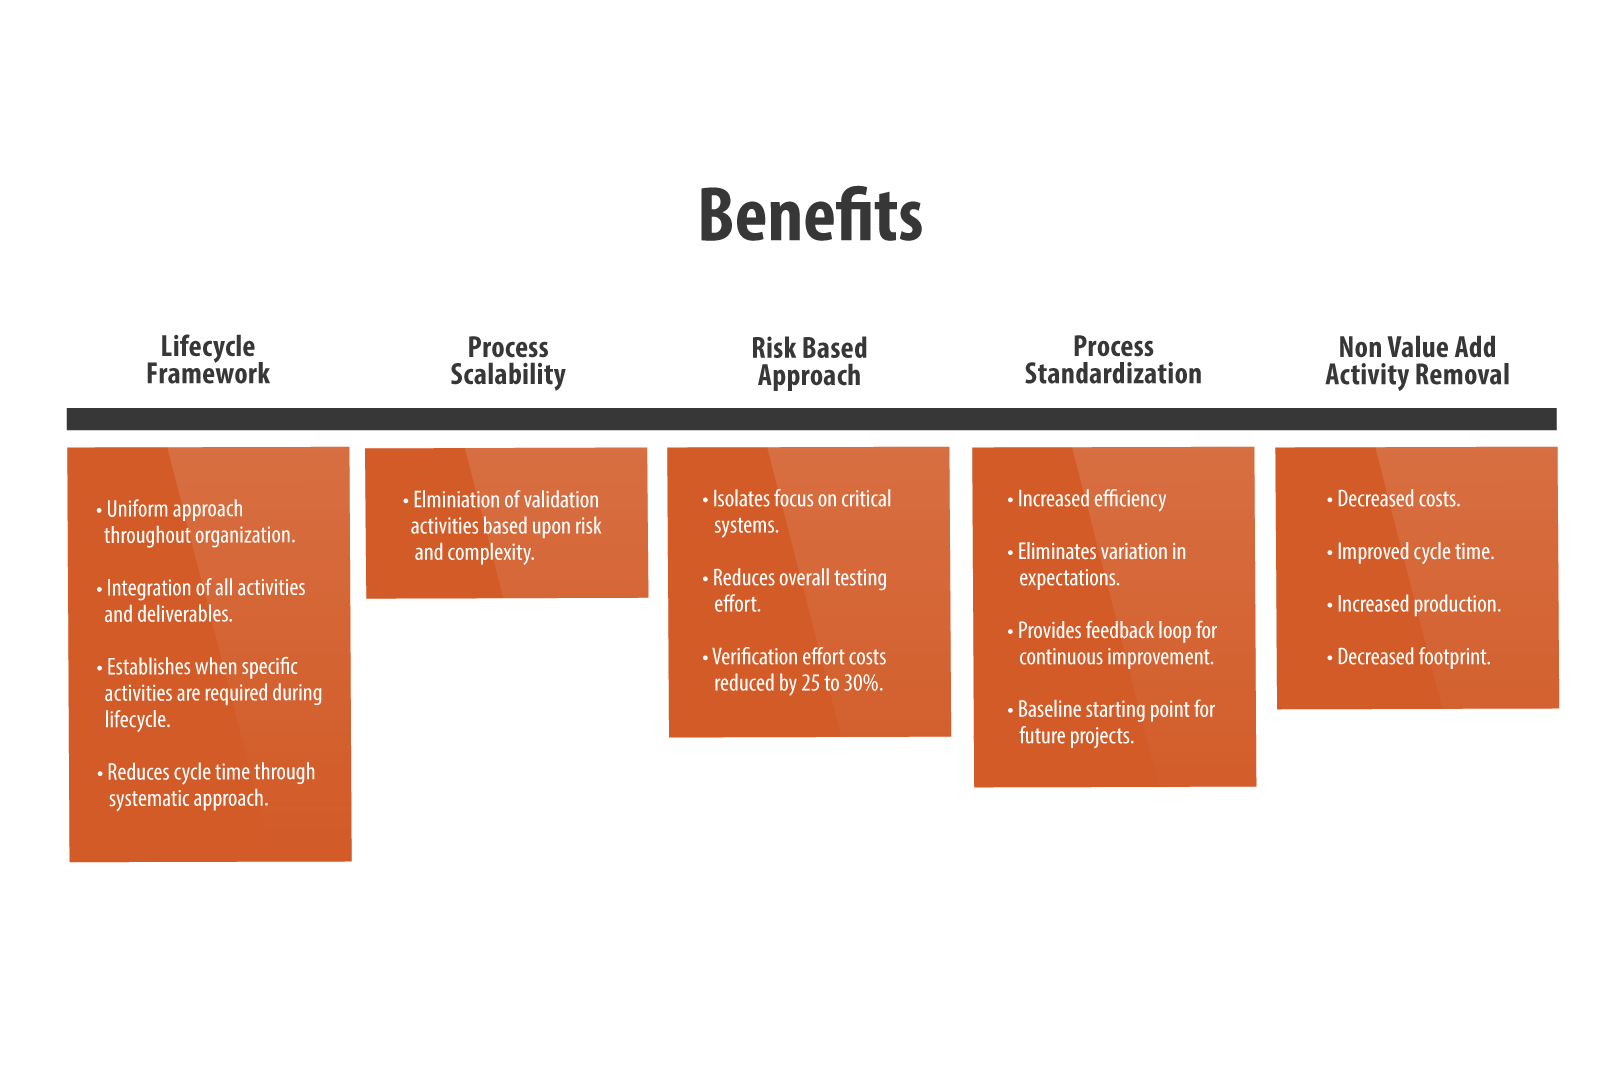 Benefits of Computer System Validation Infographic. Details the lifecycle framework, process scalability, risk based approach, process standardization, and non-value add activity removal.